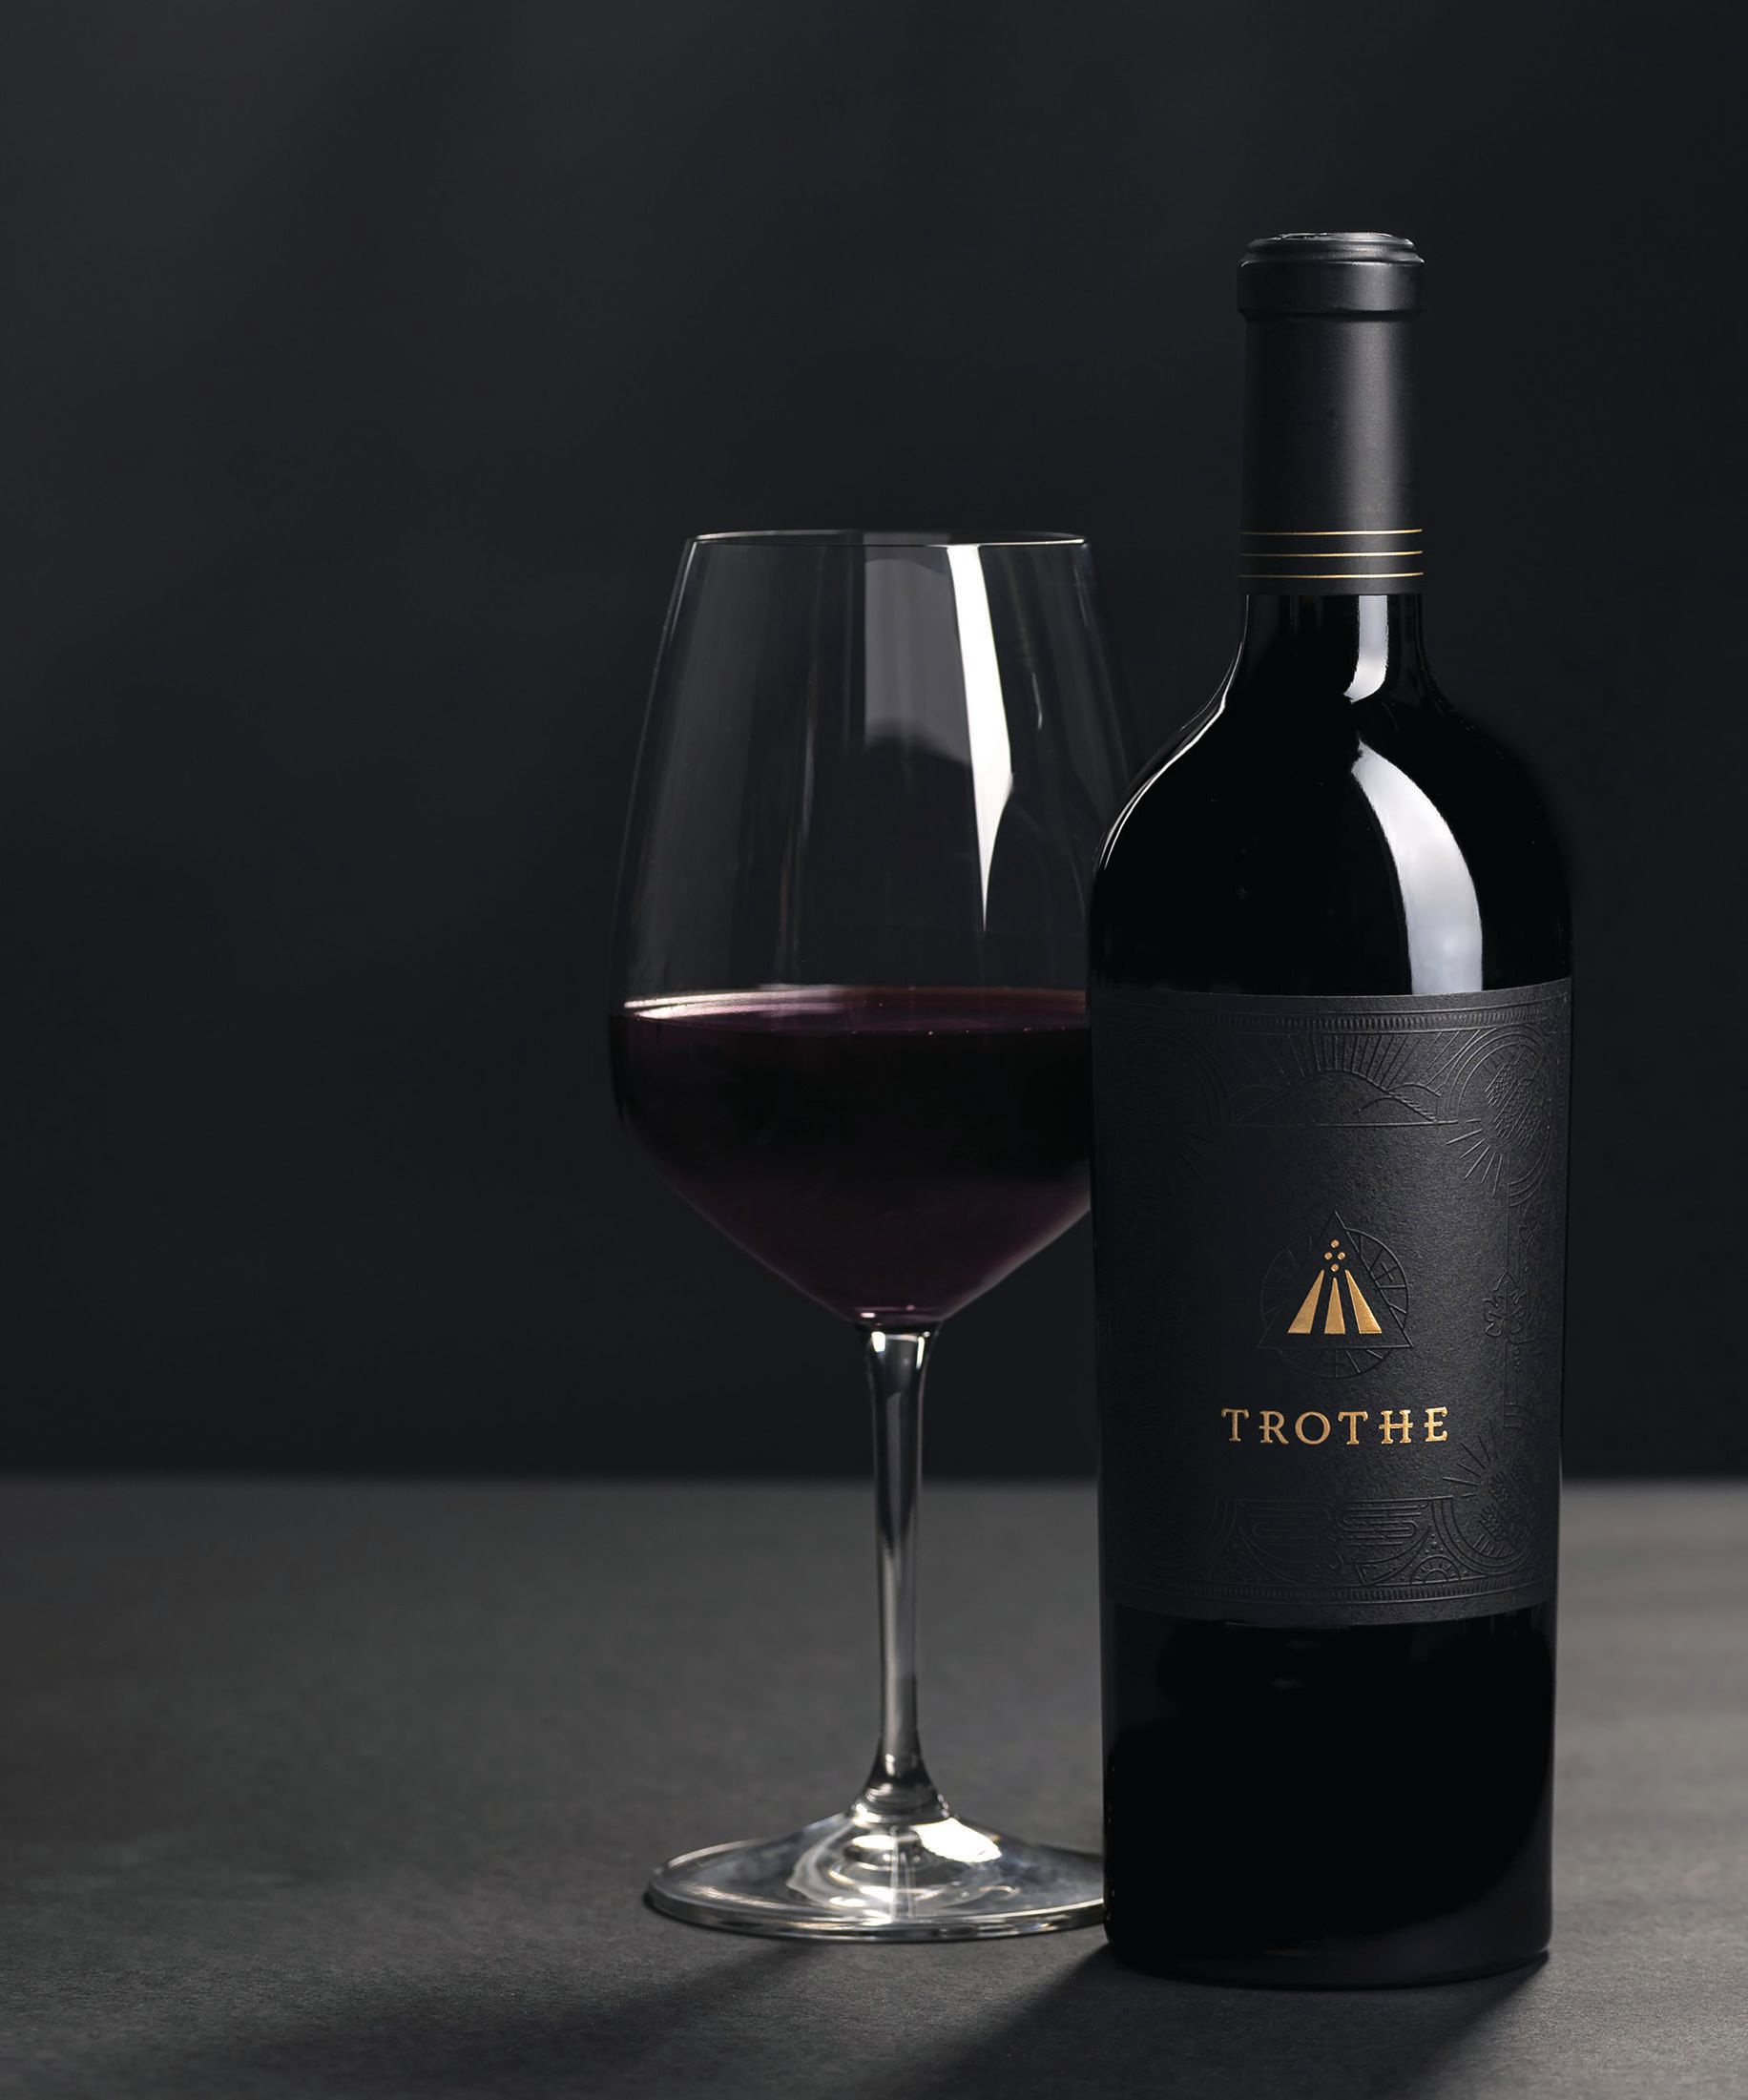 Pair this Trothe cabernet with a bone-in ribeye from Flannery Steak. PHOTO BY CAMERON KARSTEN